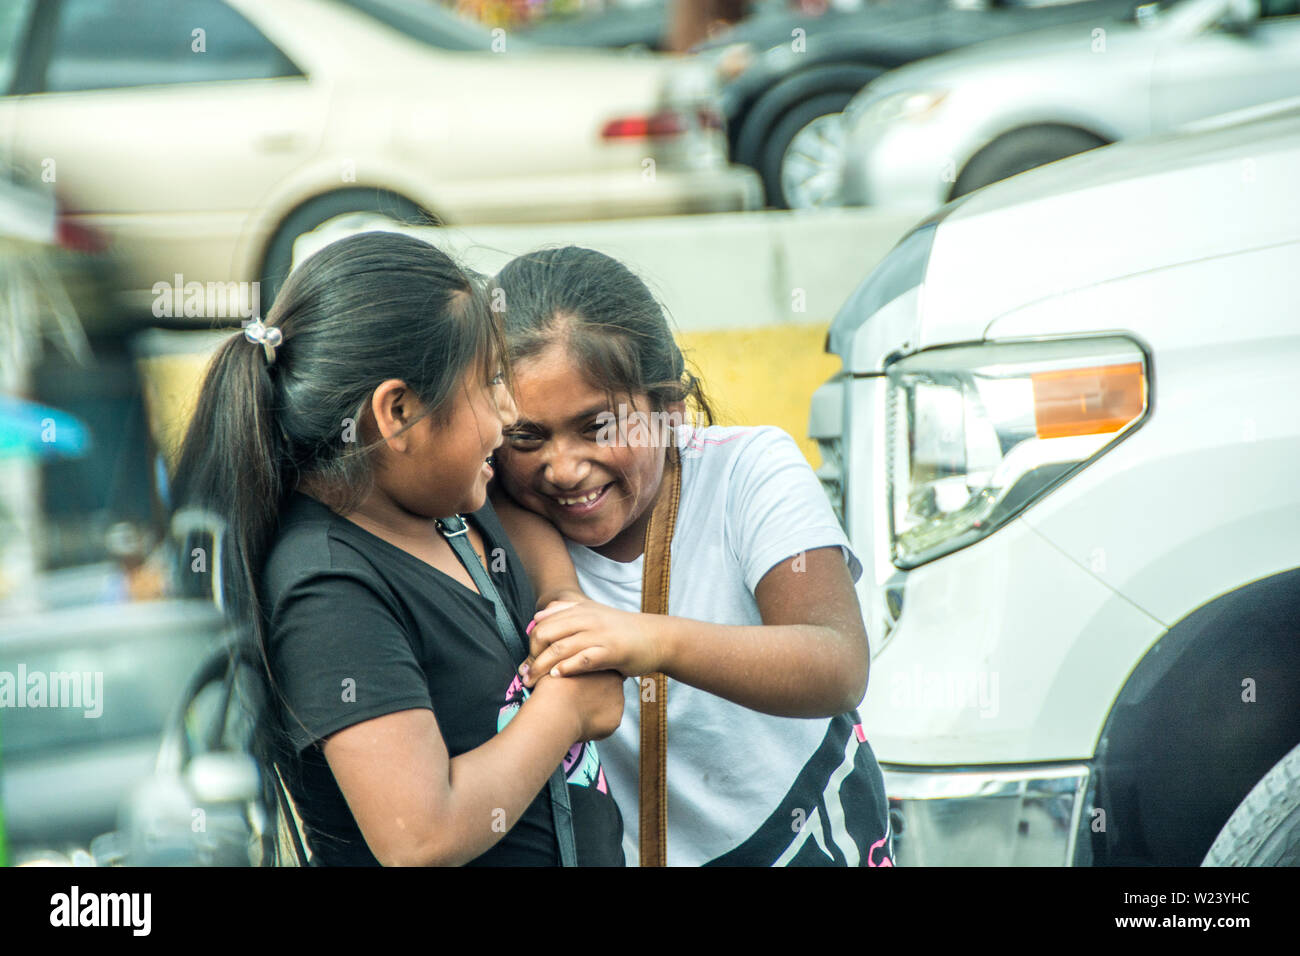 Two young, preteen Mexican girls playing, at the San Ysidro, California and Tijuana, Mexio border crossing; United States and Mexico. Stock Photo